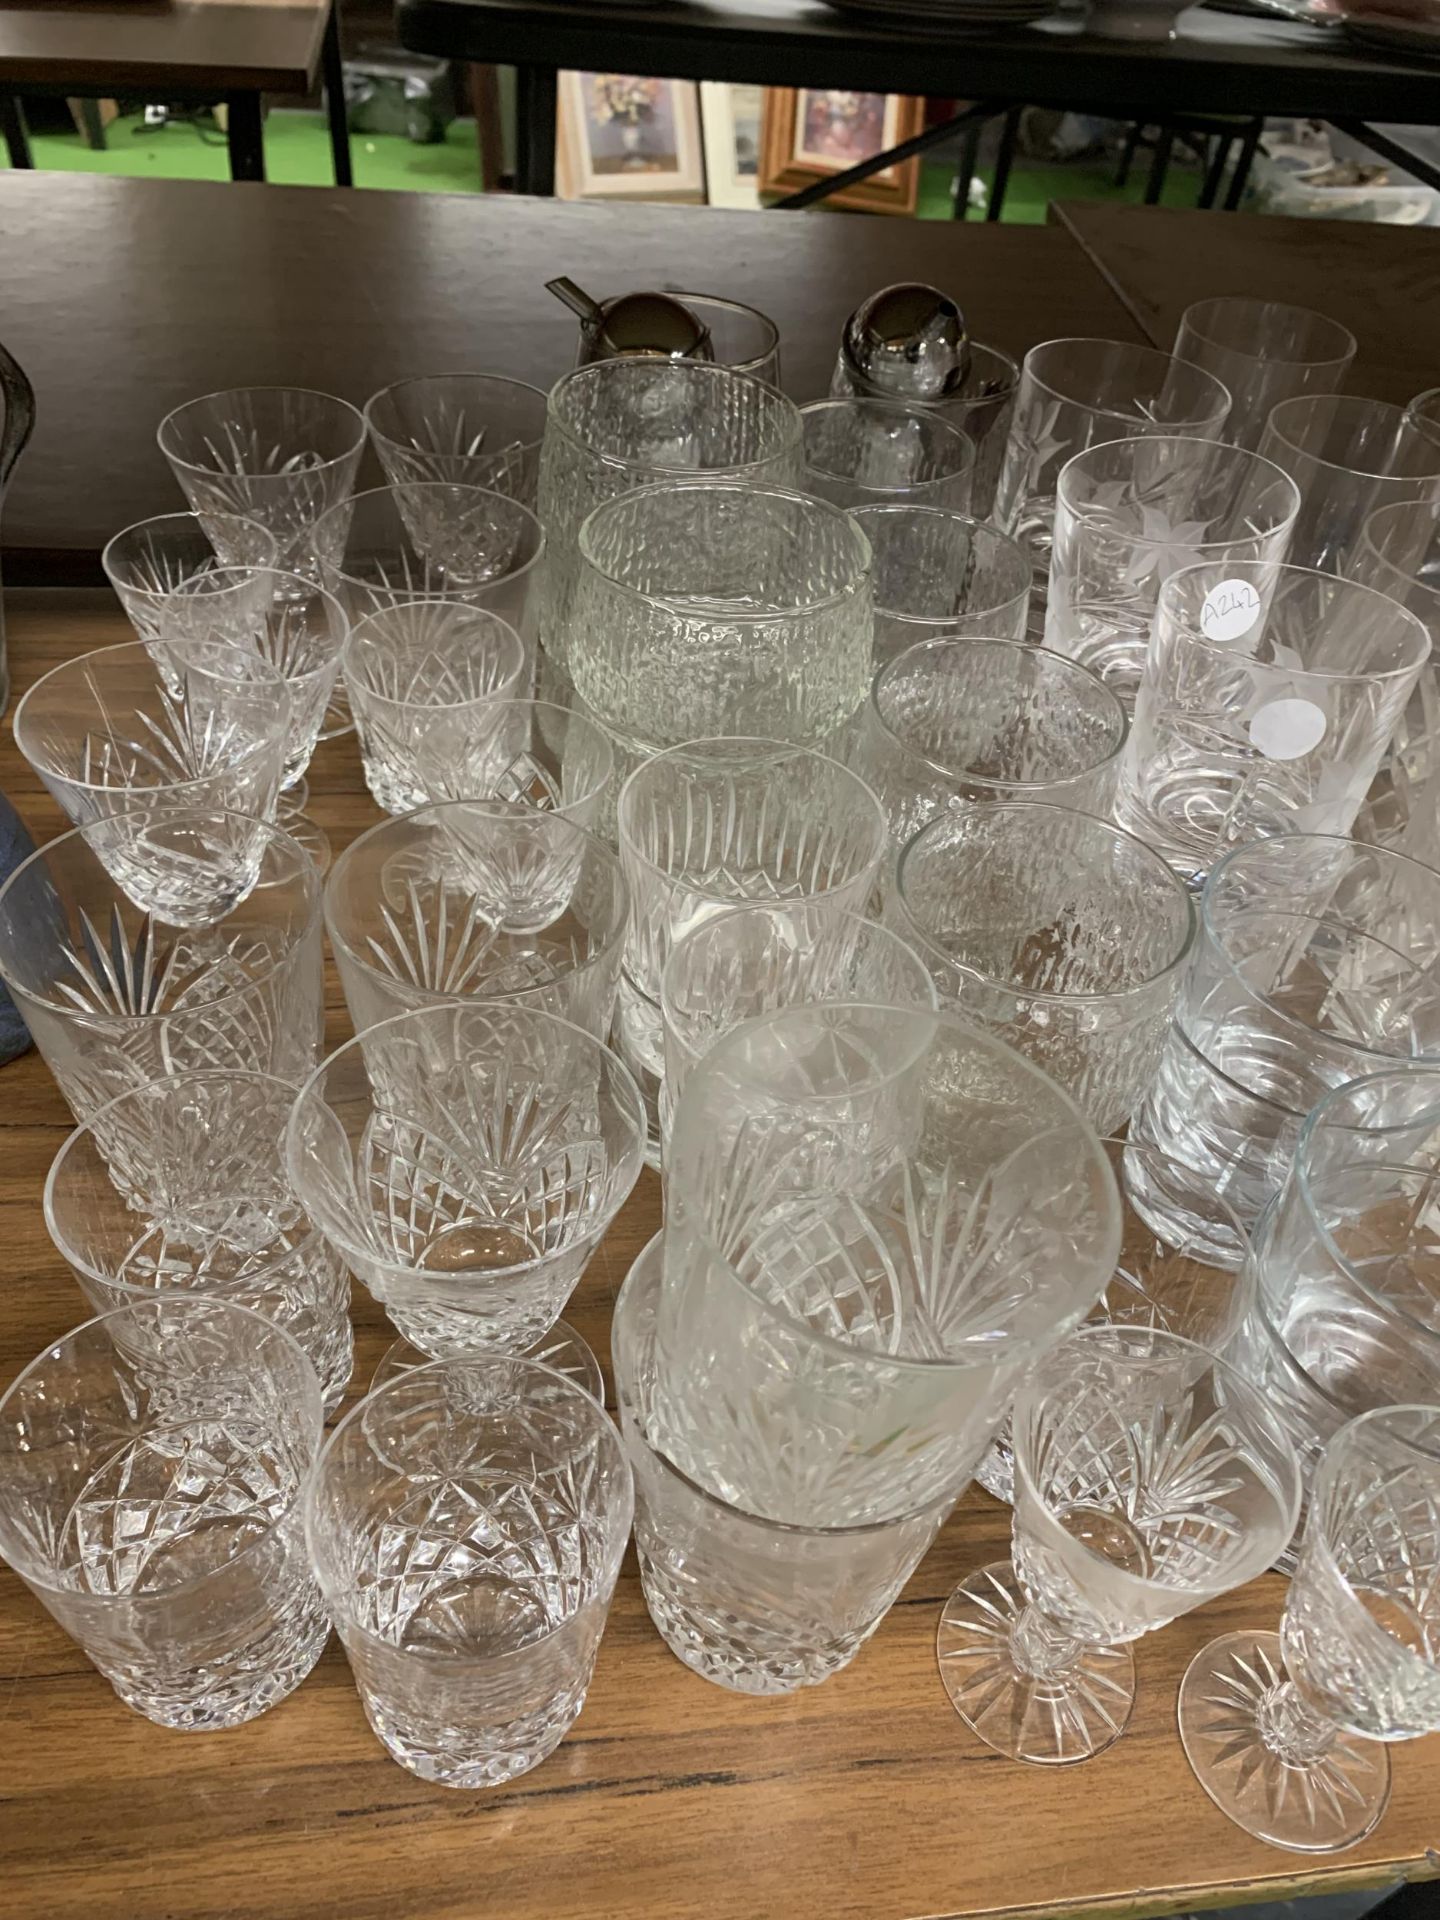 A LARGE QUANTITY OF GLASSES TO INCLUDE TUMBLERS, WINE, SHERRY, DESSERT BOWLS, WINE POURERS, ETC - Image 2 of 4